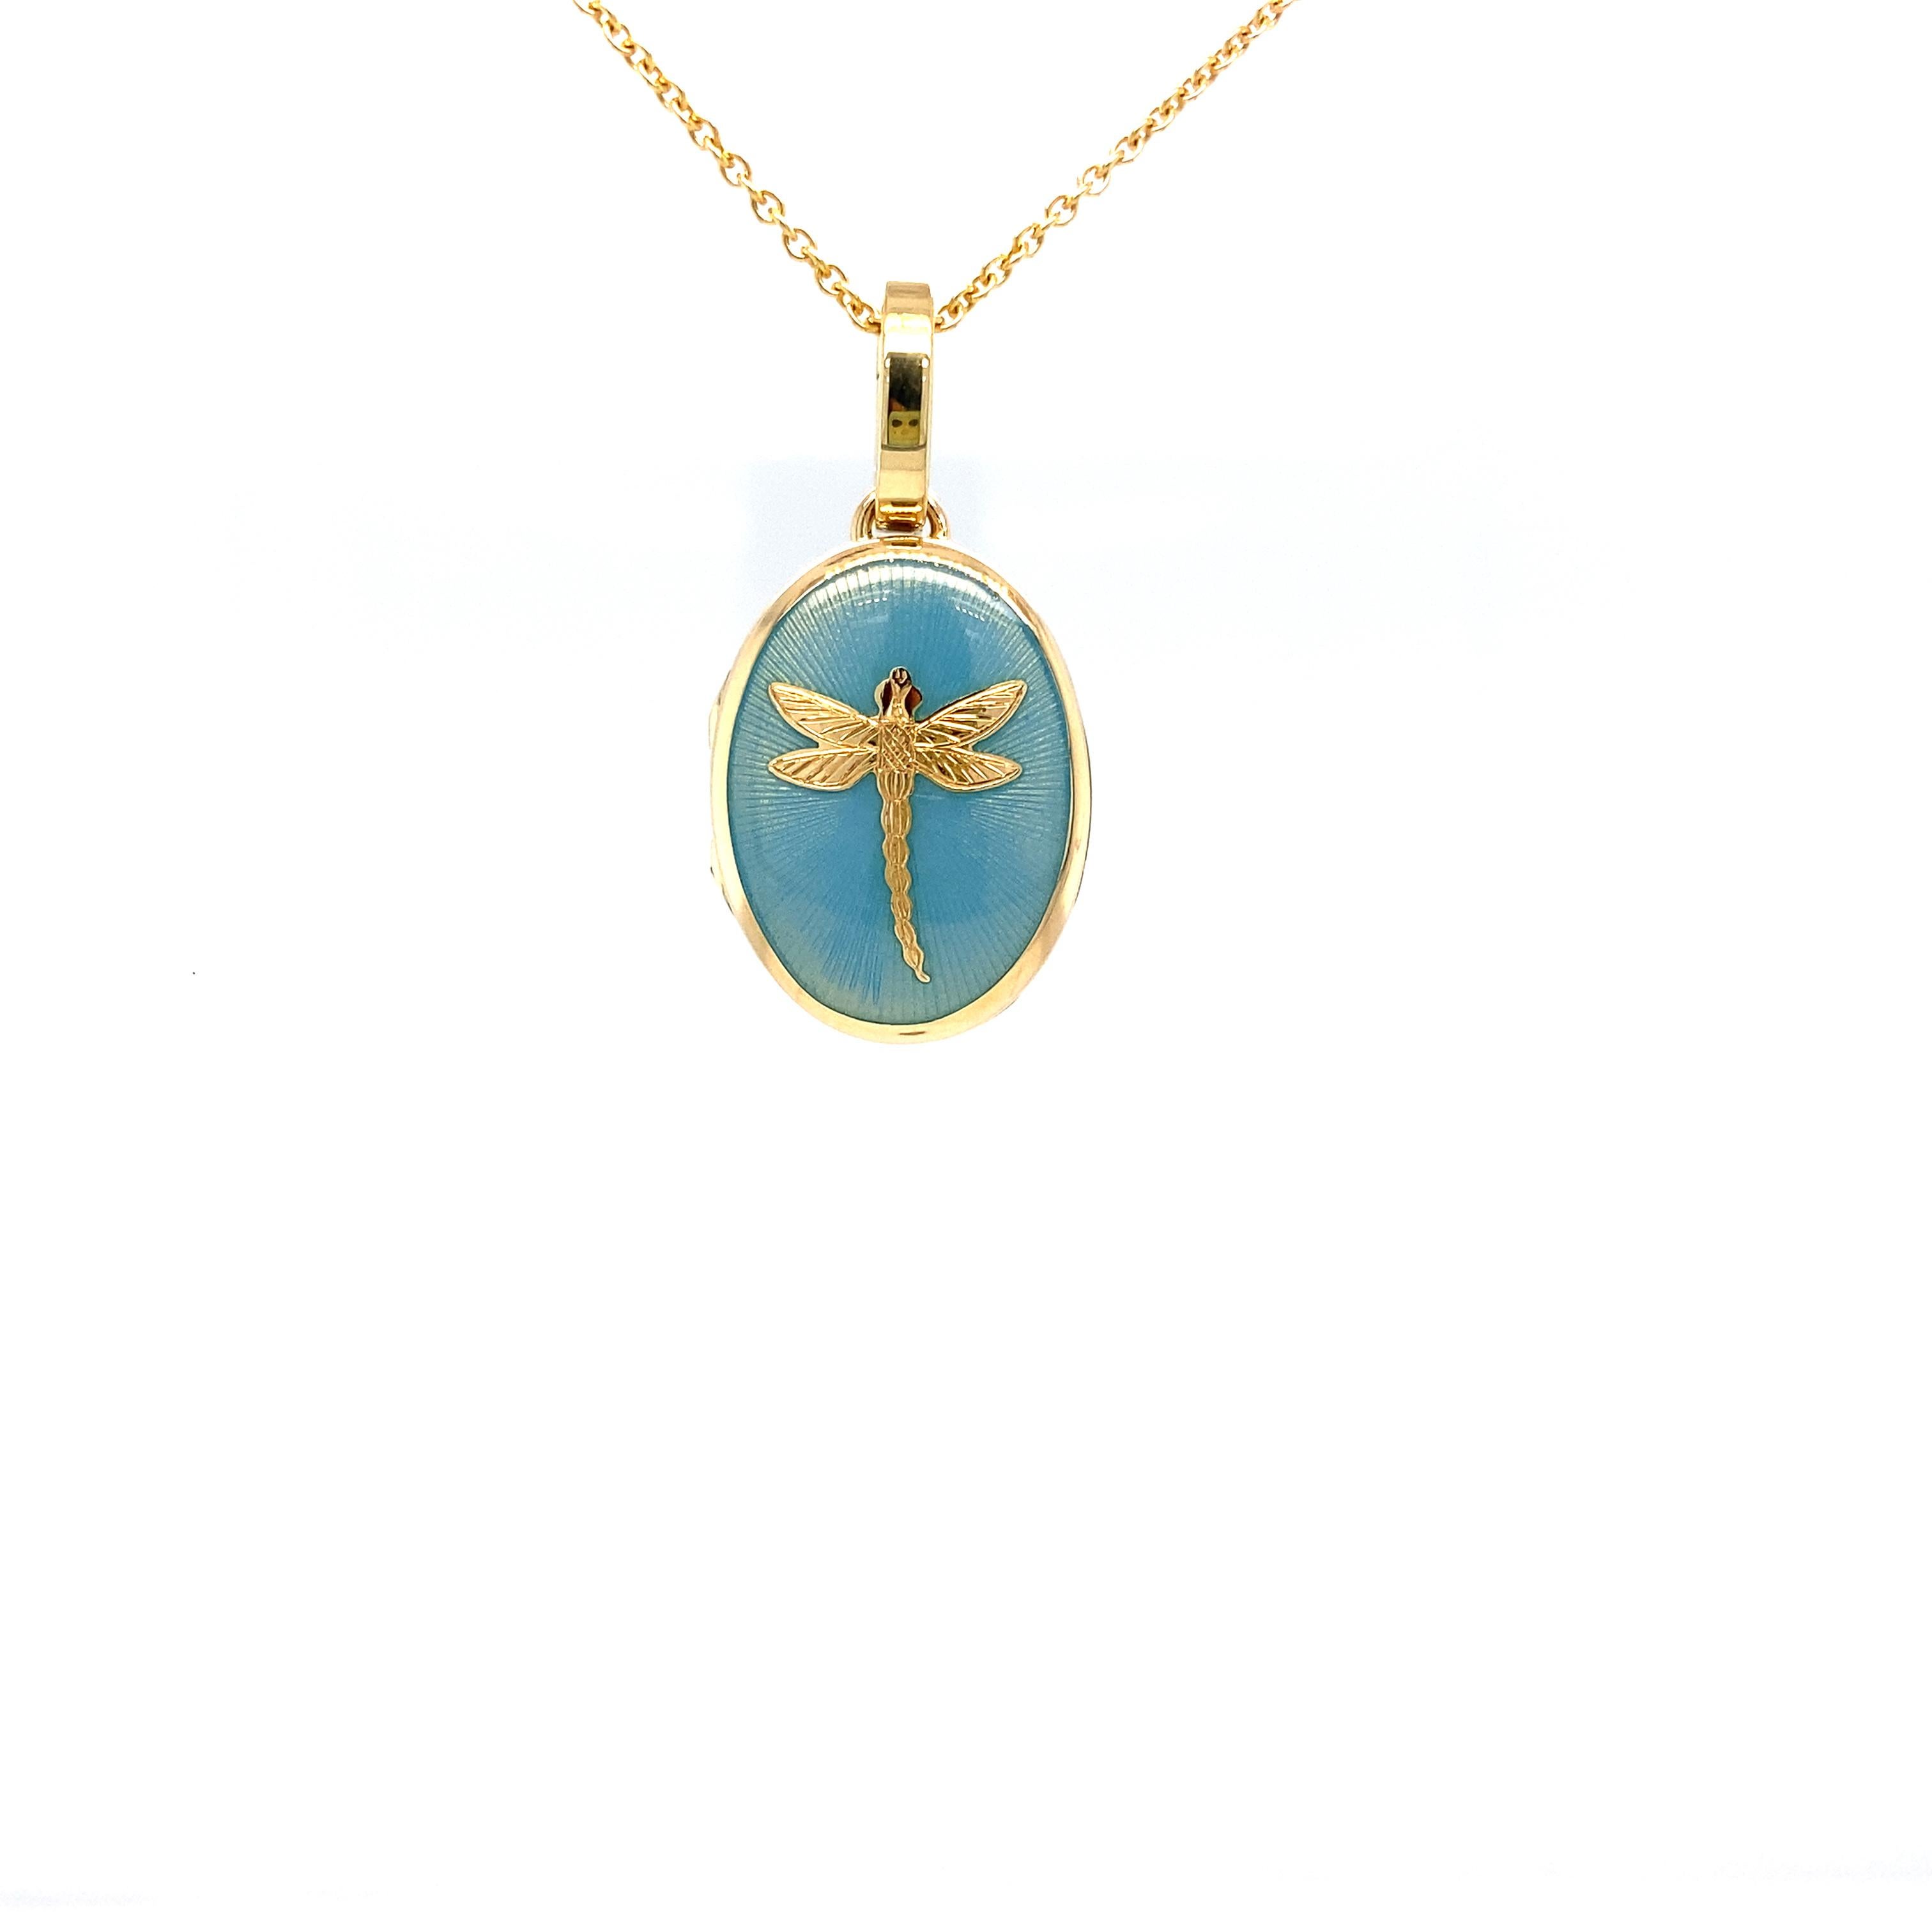 Victor Mayer customizable oval locket pendant with dragonfly 18k yellow gold, Hallmark collection, translucent opalescent turquoise vitreous enamel, guilloche, measurements app. 15.0 mm x 20.0 mm

About the creator Victor Mayer
Victor Mayer is